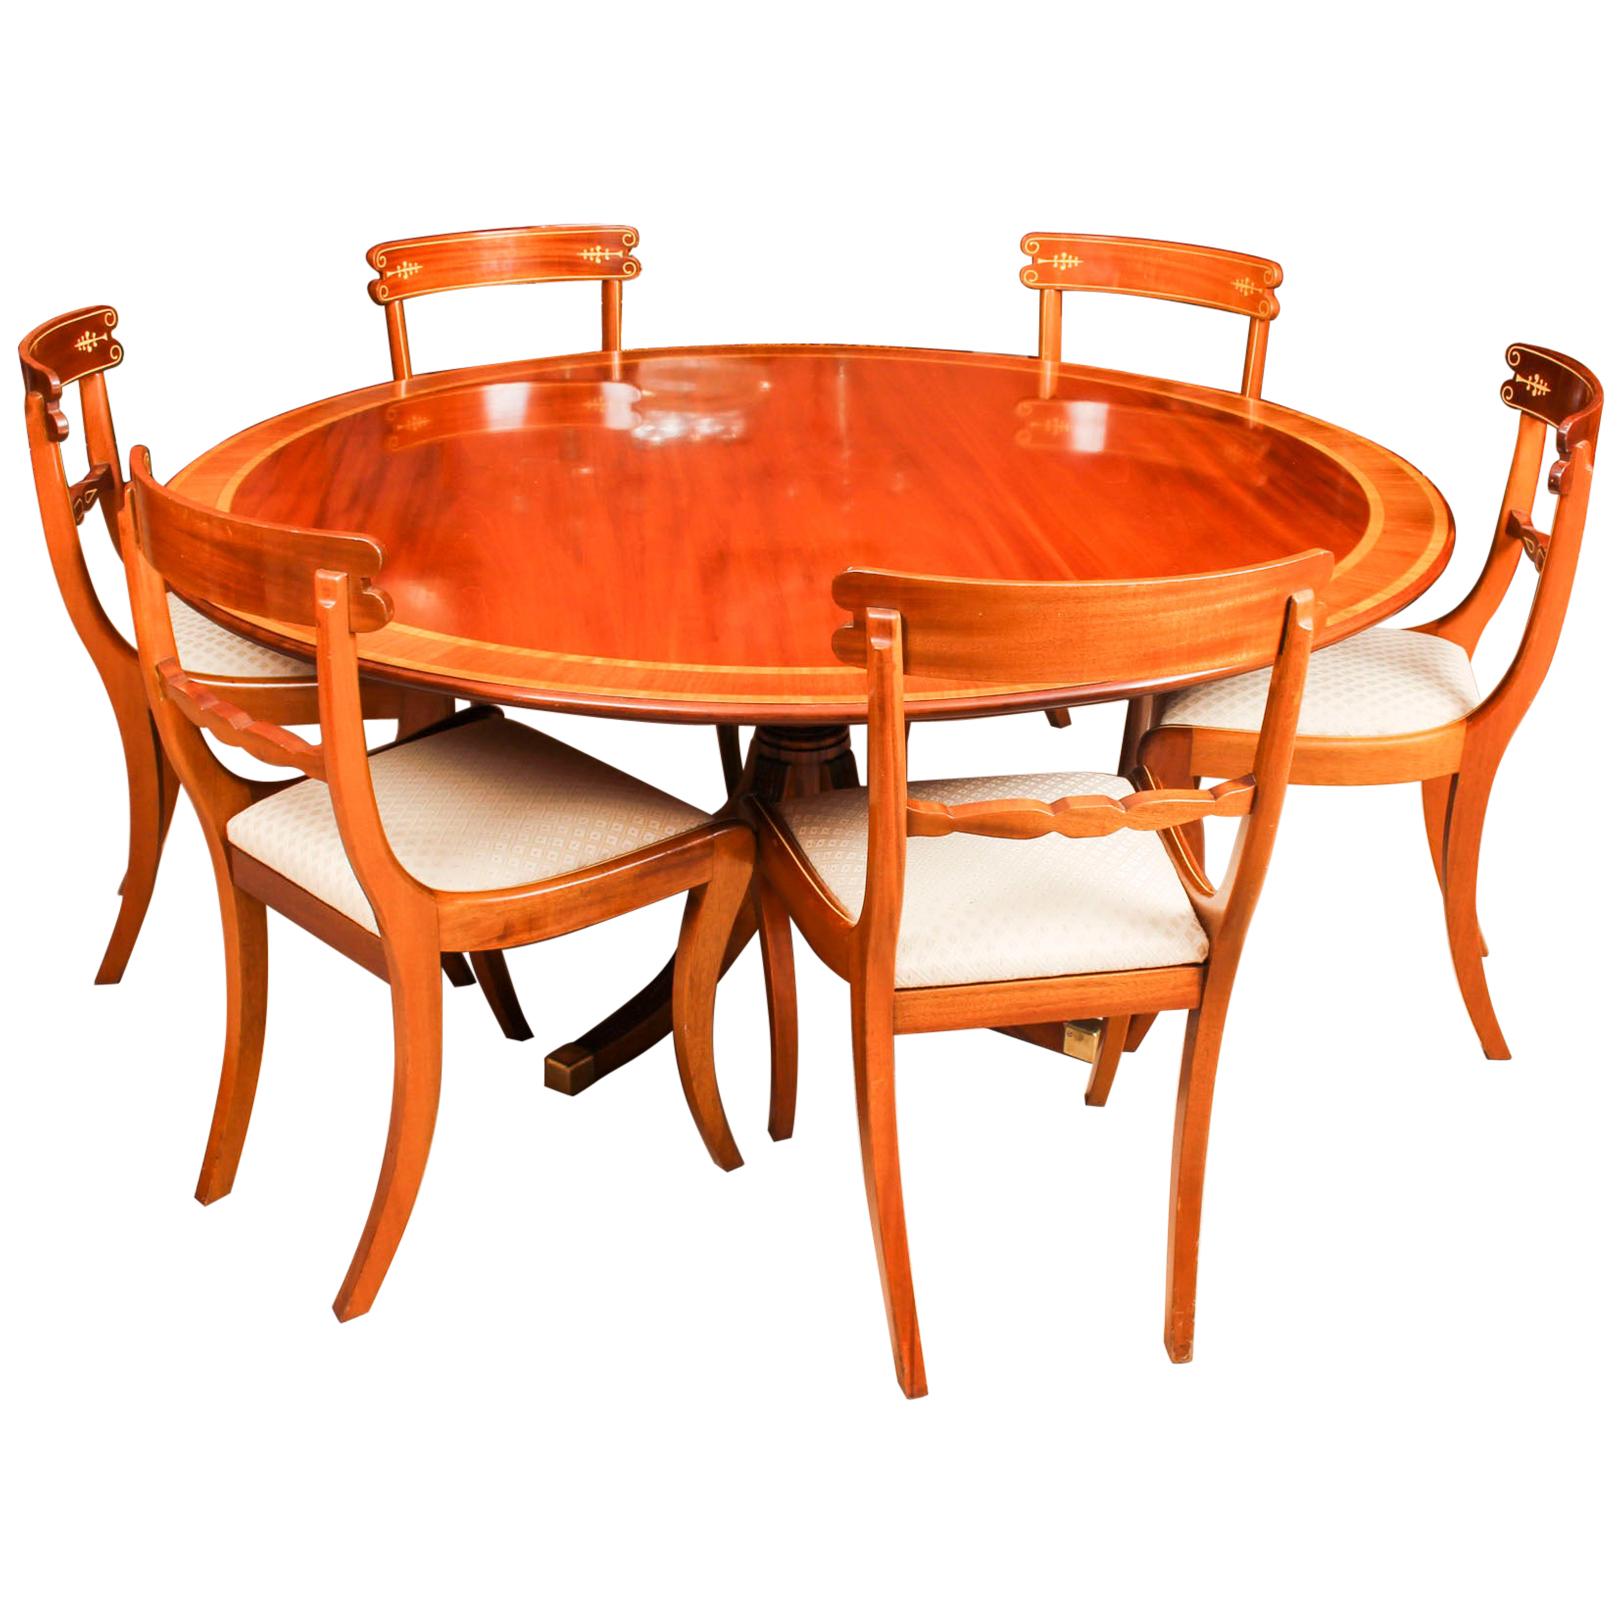 William Tillman Regency Dining Table and 6 Regency Style Chairs, 20th Century